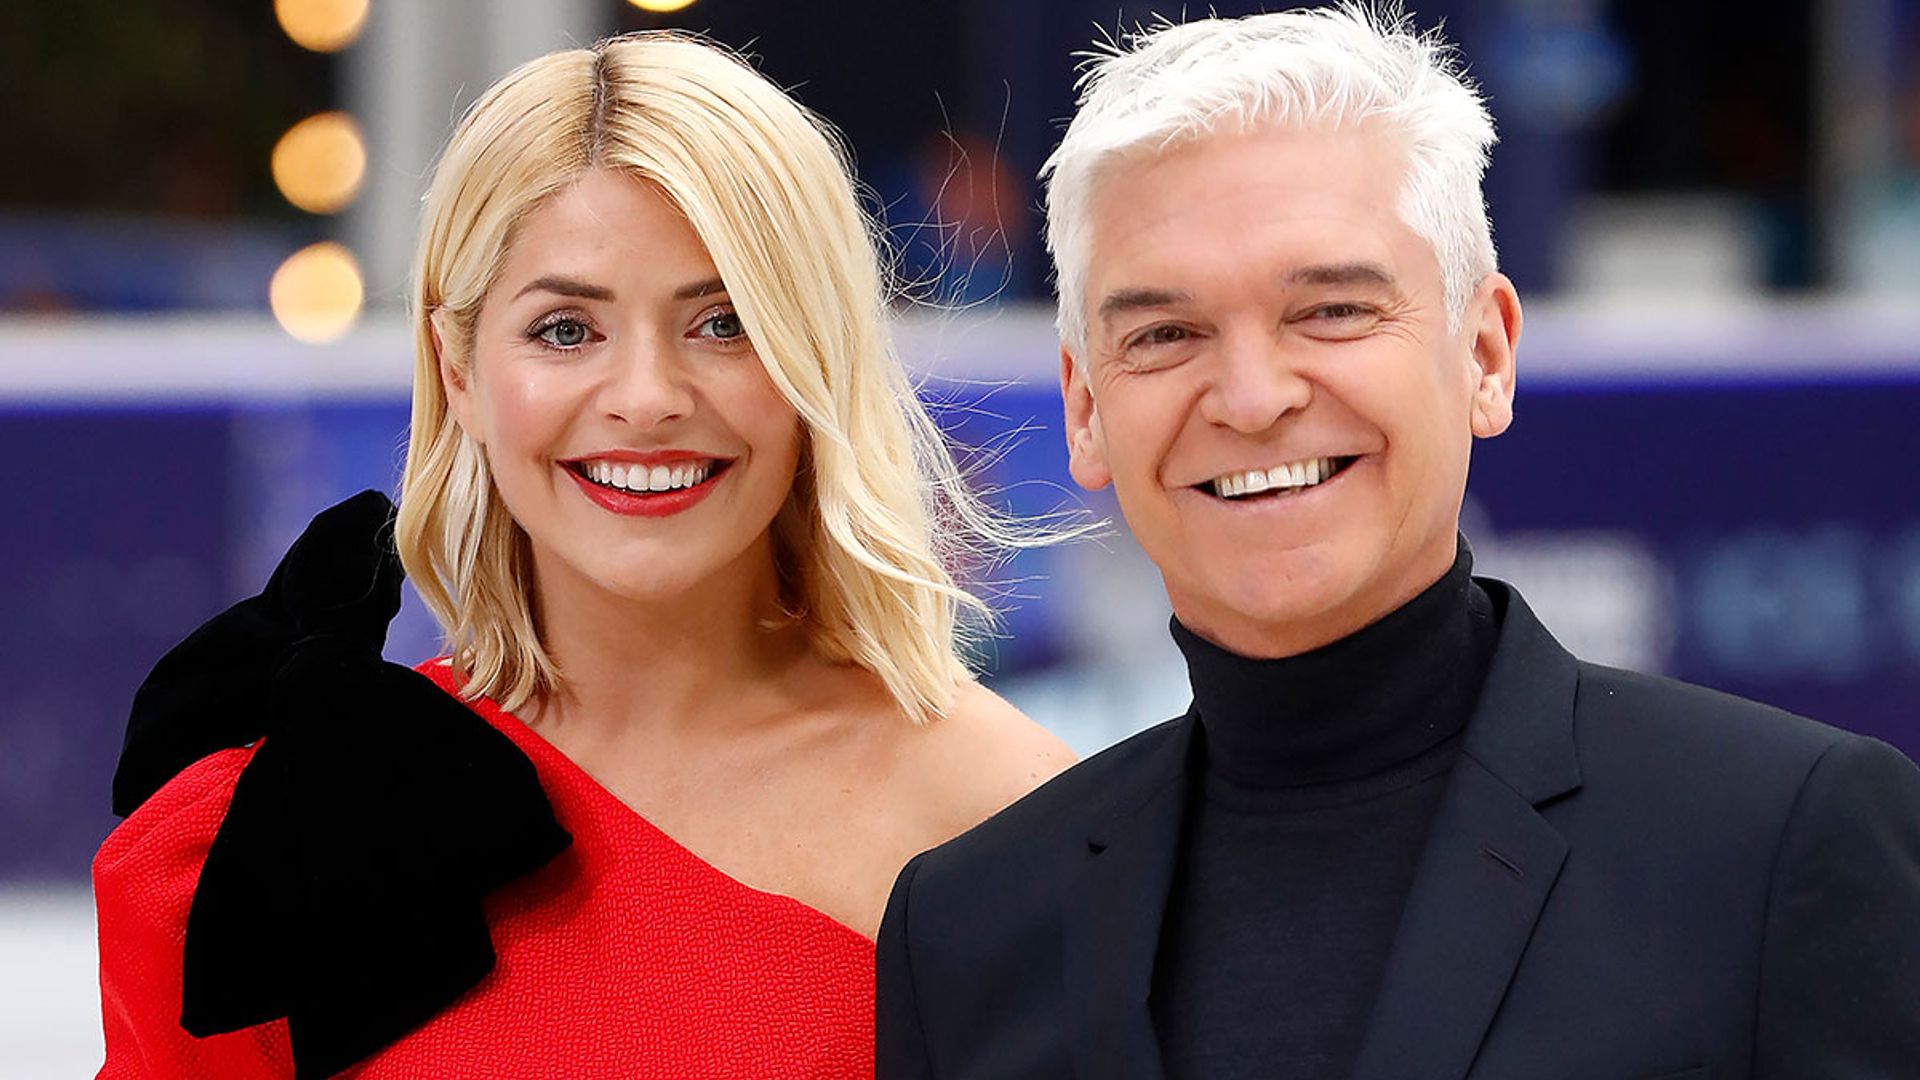 Phillip Schofield commends Holly Willoughby for being his 'therapy' after he came out as gay